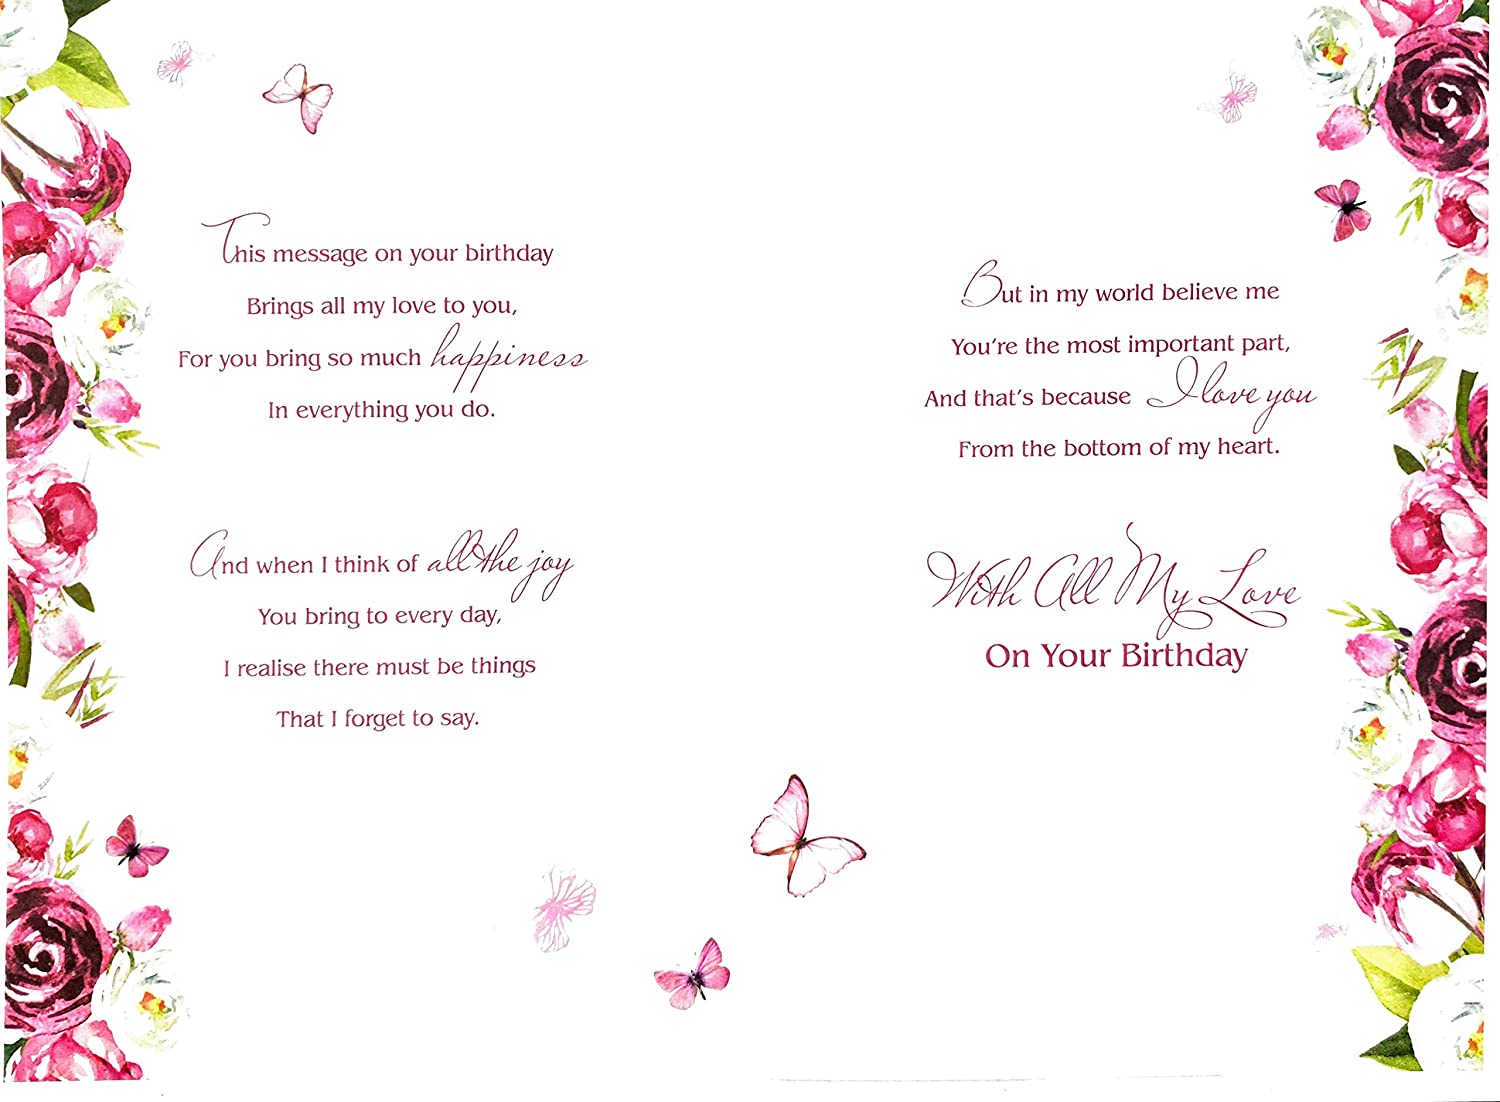 Wife Birthday Card - Blossoms Of Love